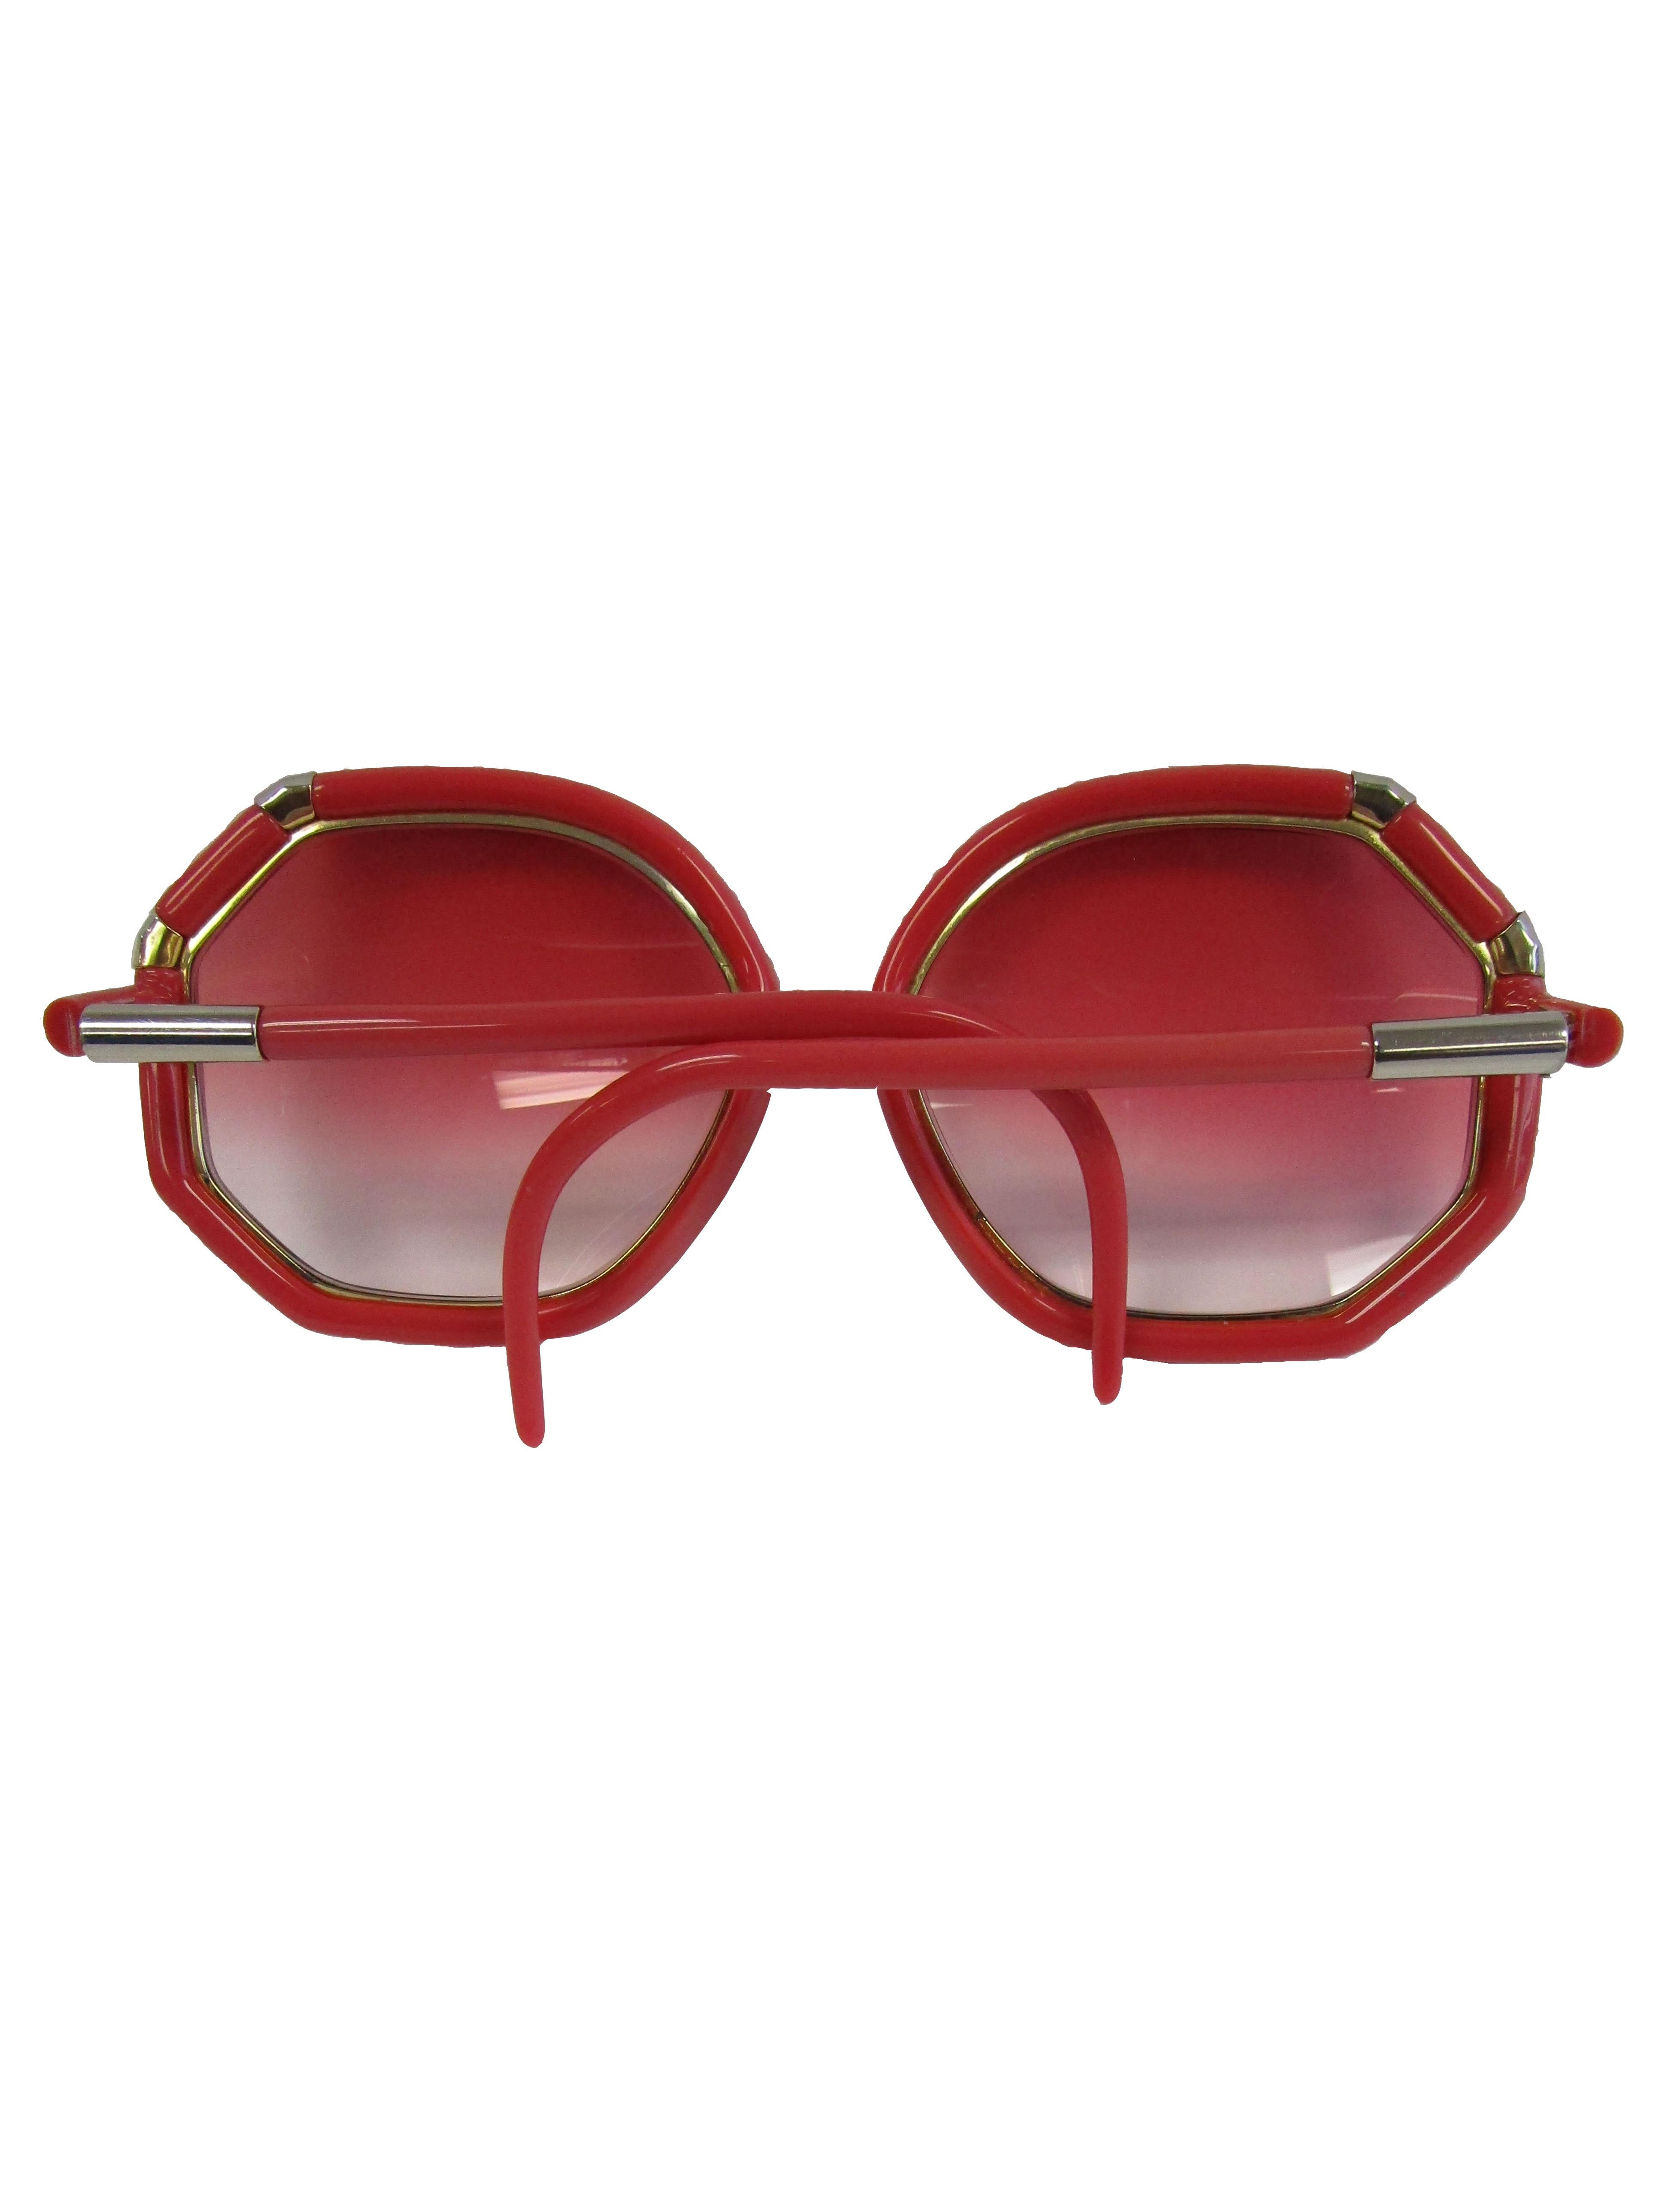 
Check out theses spectacular 1970's Red Ted Lapidus sunglasses featuring an octagonal frame silver/gold hardware and rose ombre lenses that keep you looking cool all summer!

bridge : .5 in
lens : 2.5 in
arm : 4.5 in